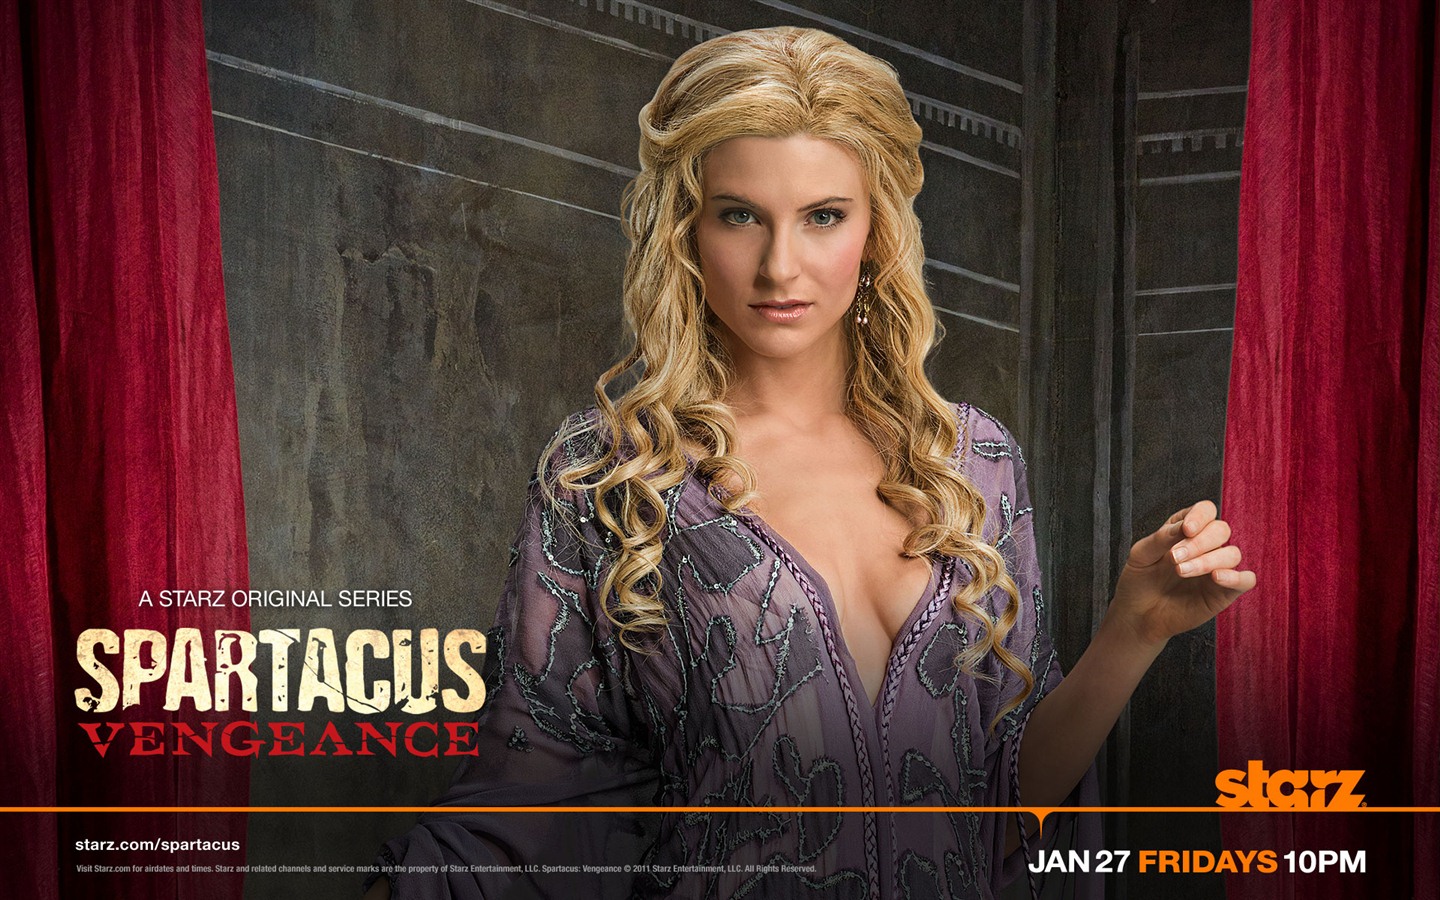 Spartacus: Vengeance HD wallpapers #15 - 1440x900